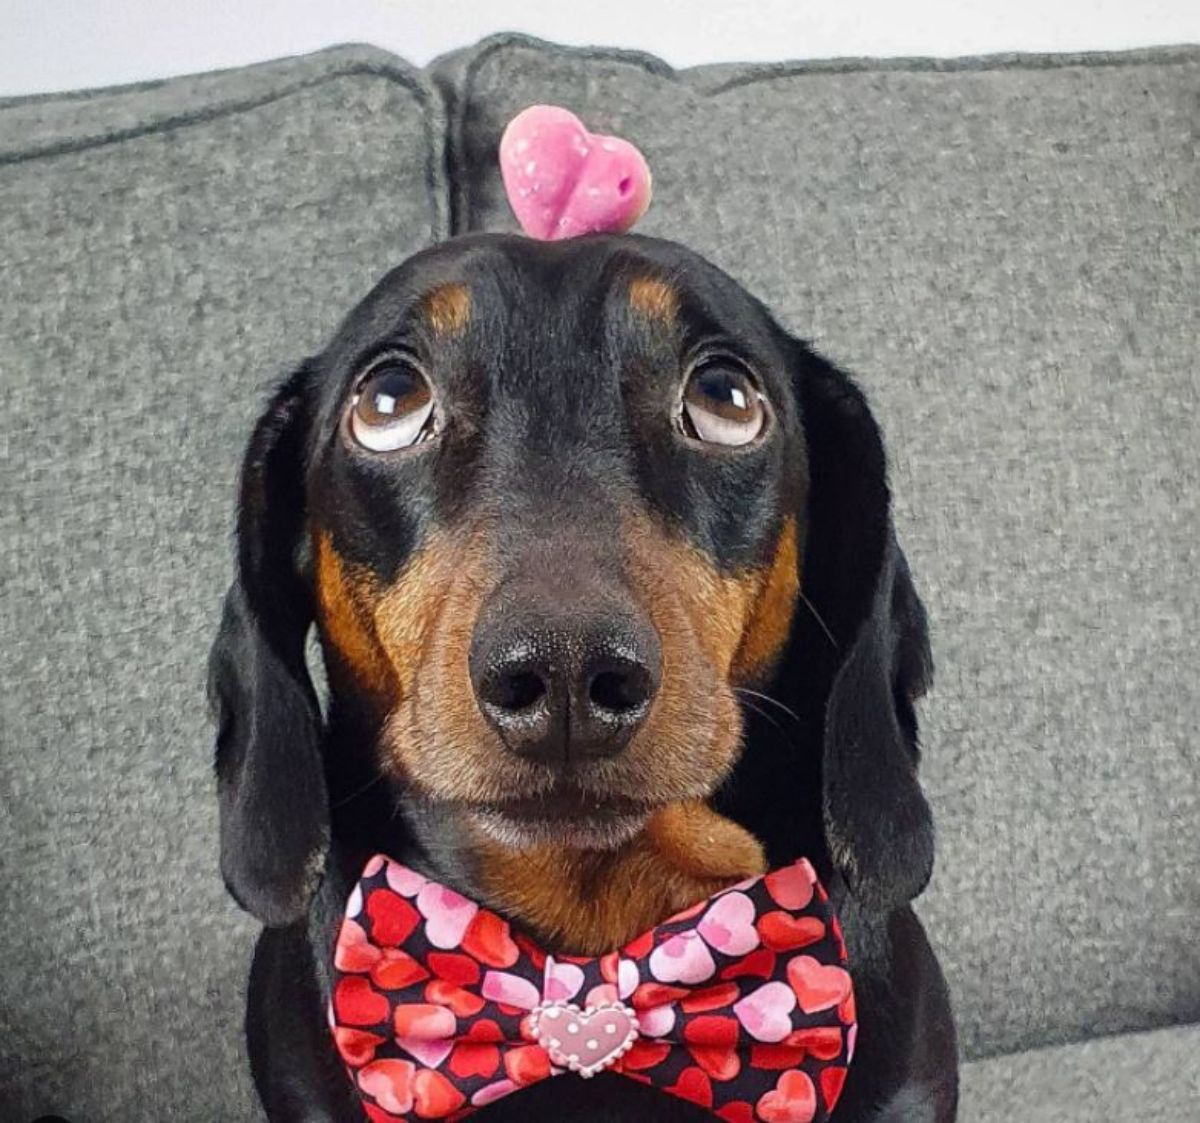 black and brown dachshund with a small pink heart object on the head and the dog is wearing a black and red heart patterned bowtie